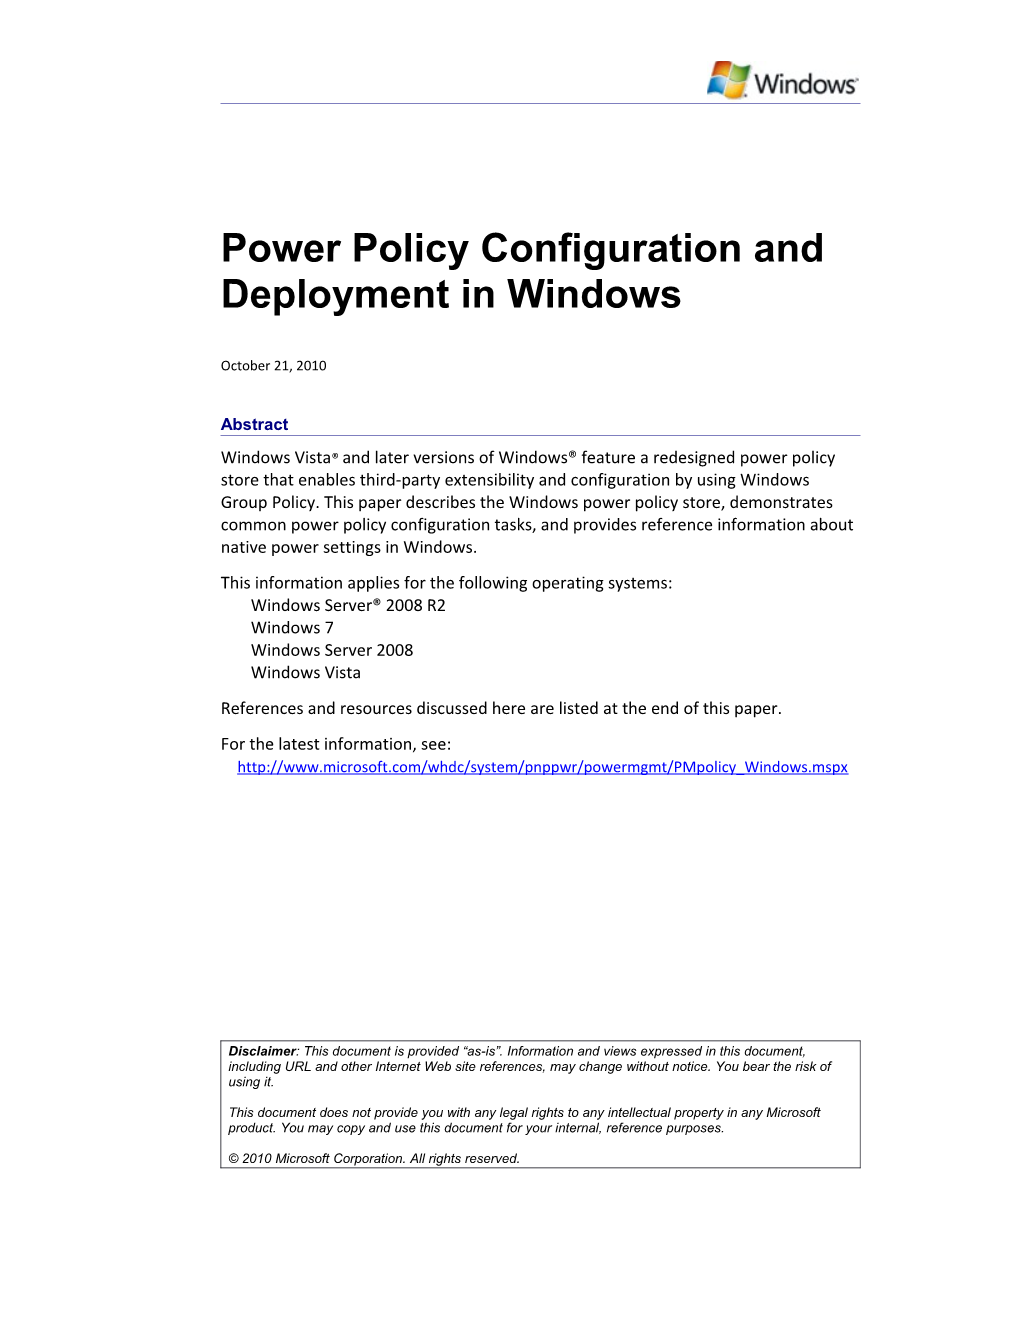 Power Policy Configuration and Deployment in Windows - 1